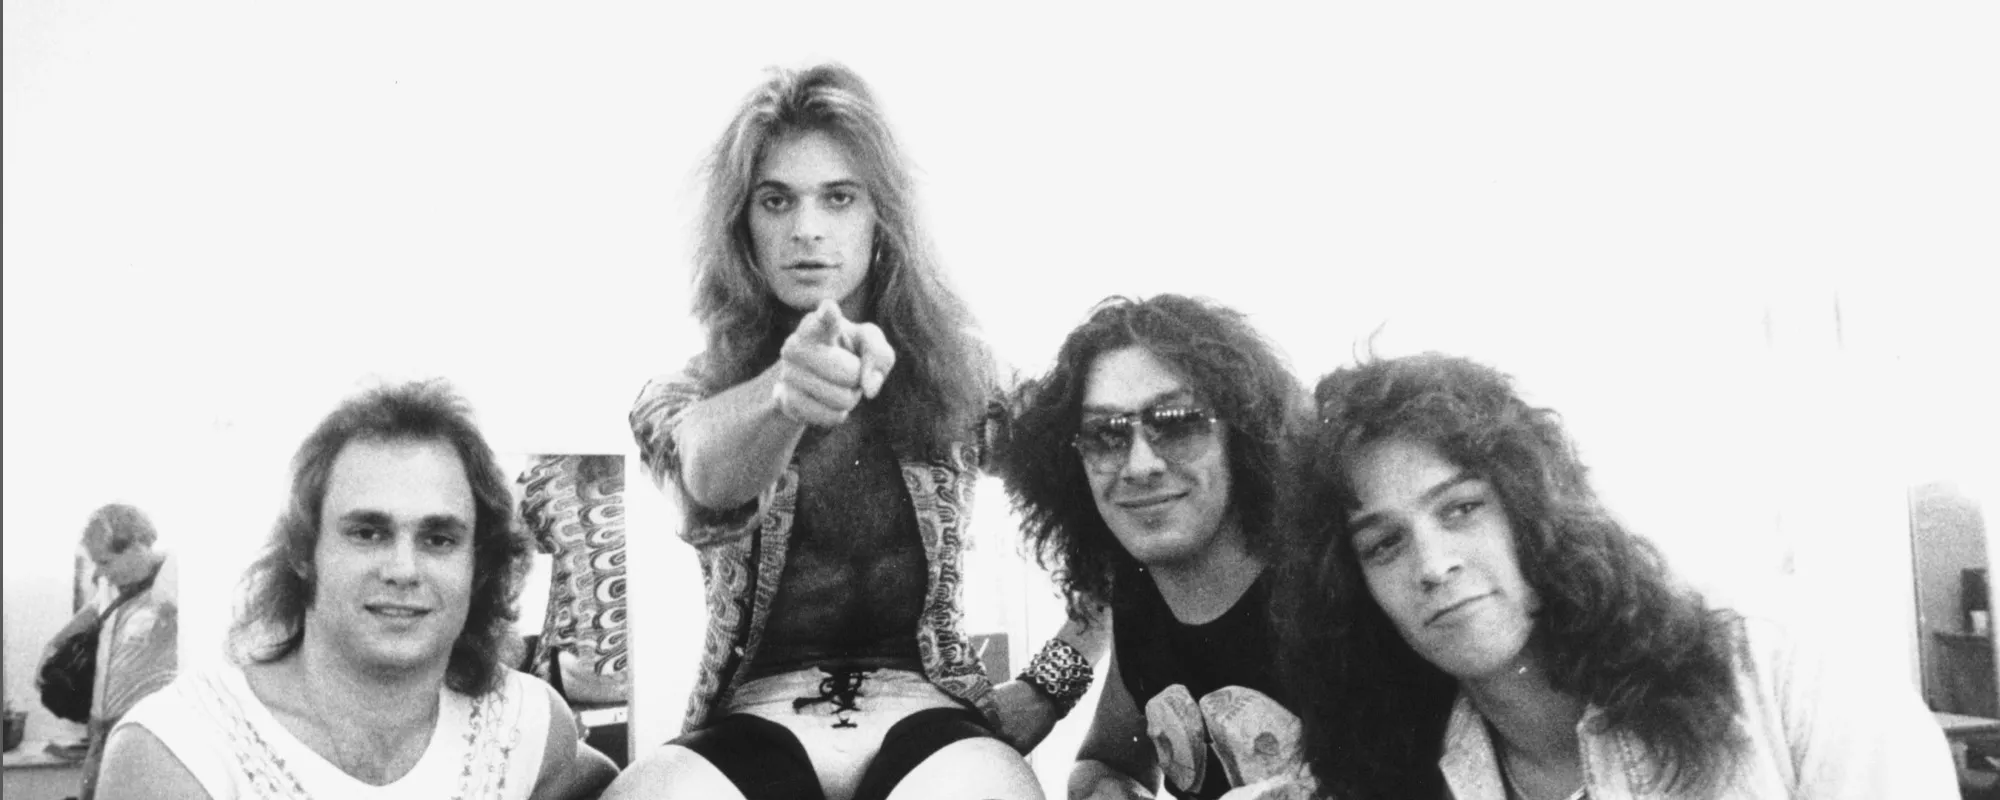 The Meaning Behind “Runnin’ with the Devil” by Van Halen